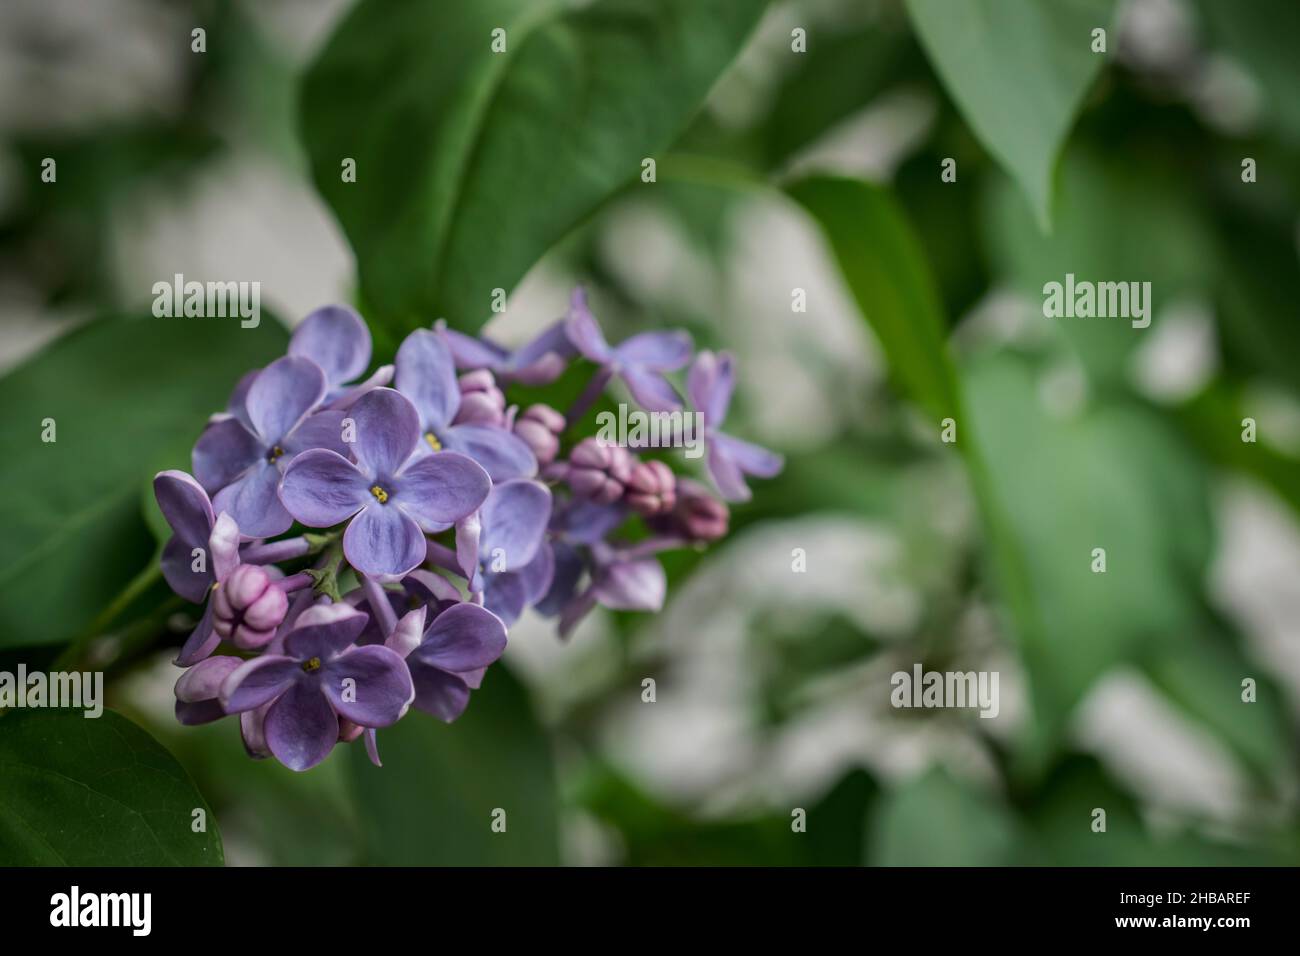 A close-up photo of a purple lilac flower in spring Stock Photo